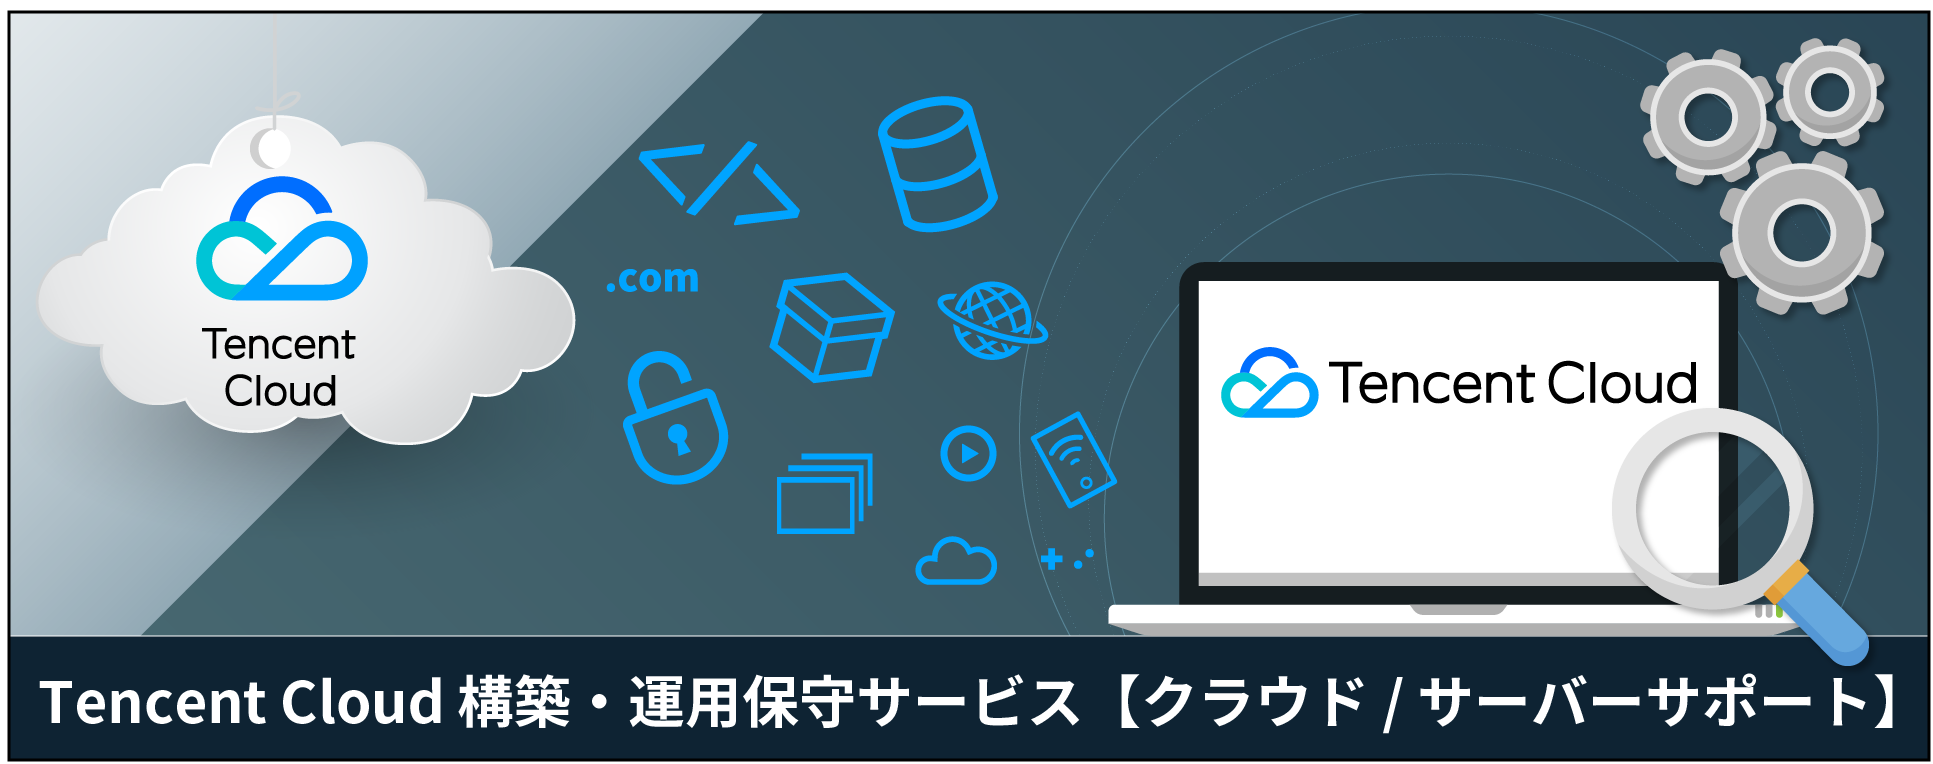 Tencent Cloud cloud/server construction, operation, maintenance, and monitoring services